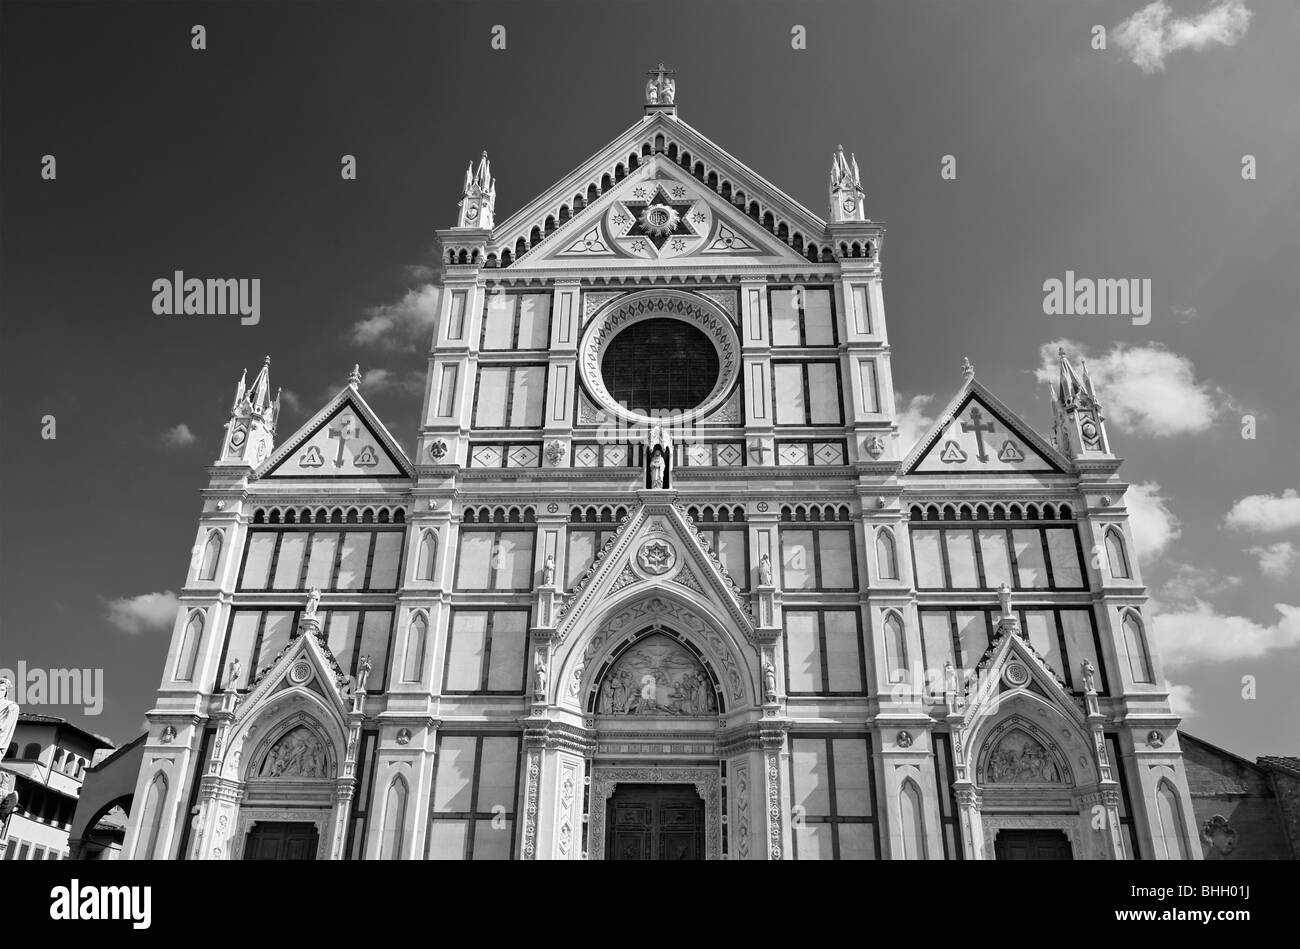 The Basilica of Santa Croce, Burial Place of Many Famous and Historic Italian Painters, Artists Composers and Inventor Stock Photo